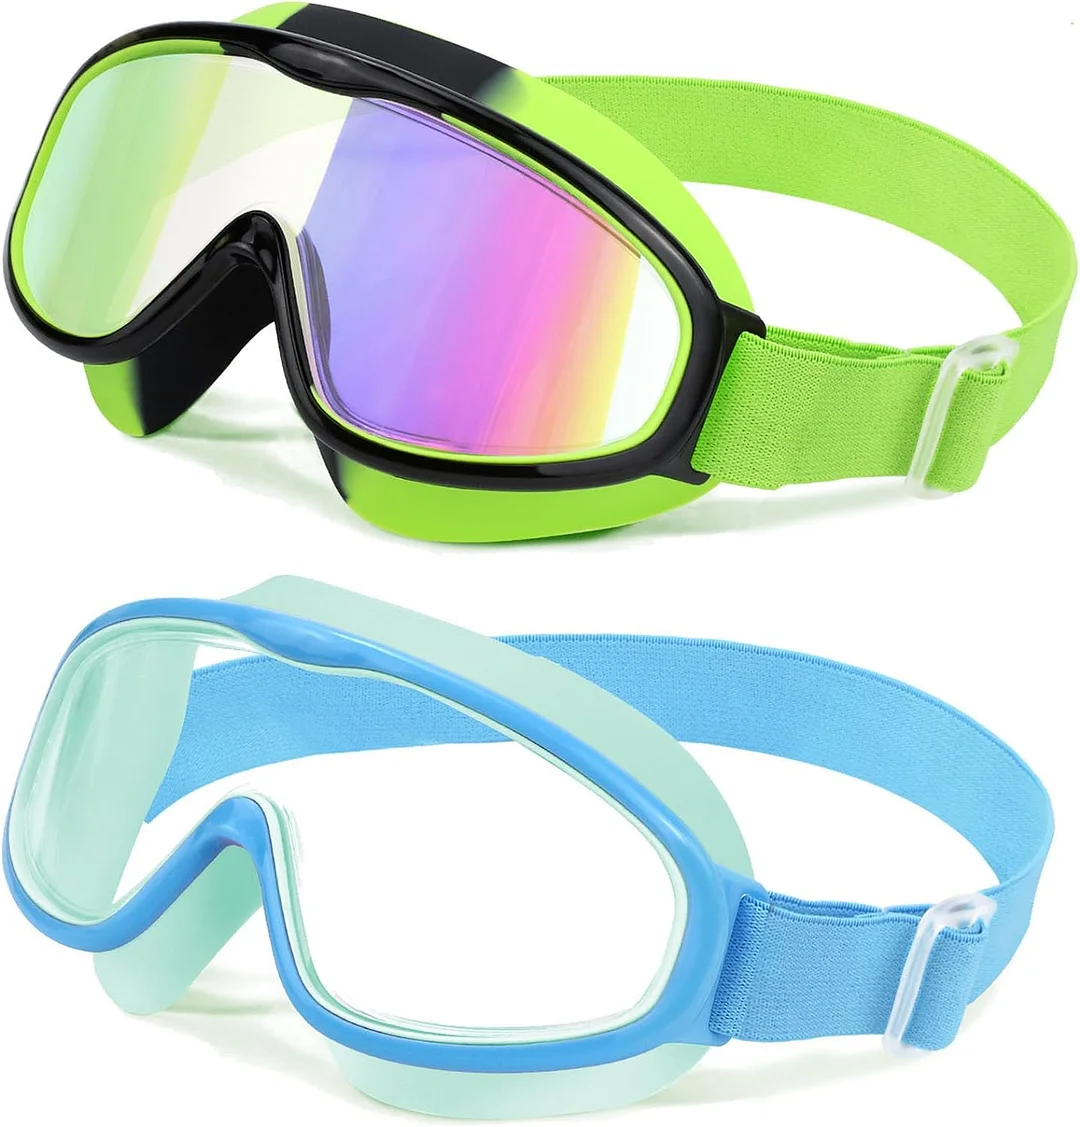 2pc Kids-Goggles with Elastic Fabric Strap